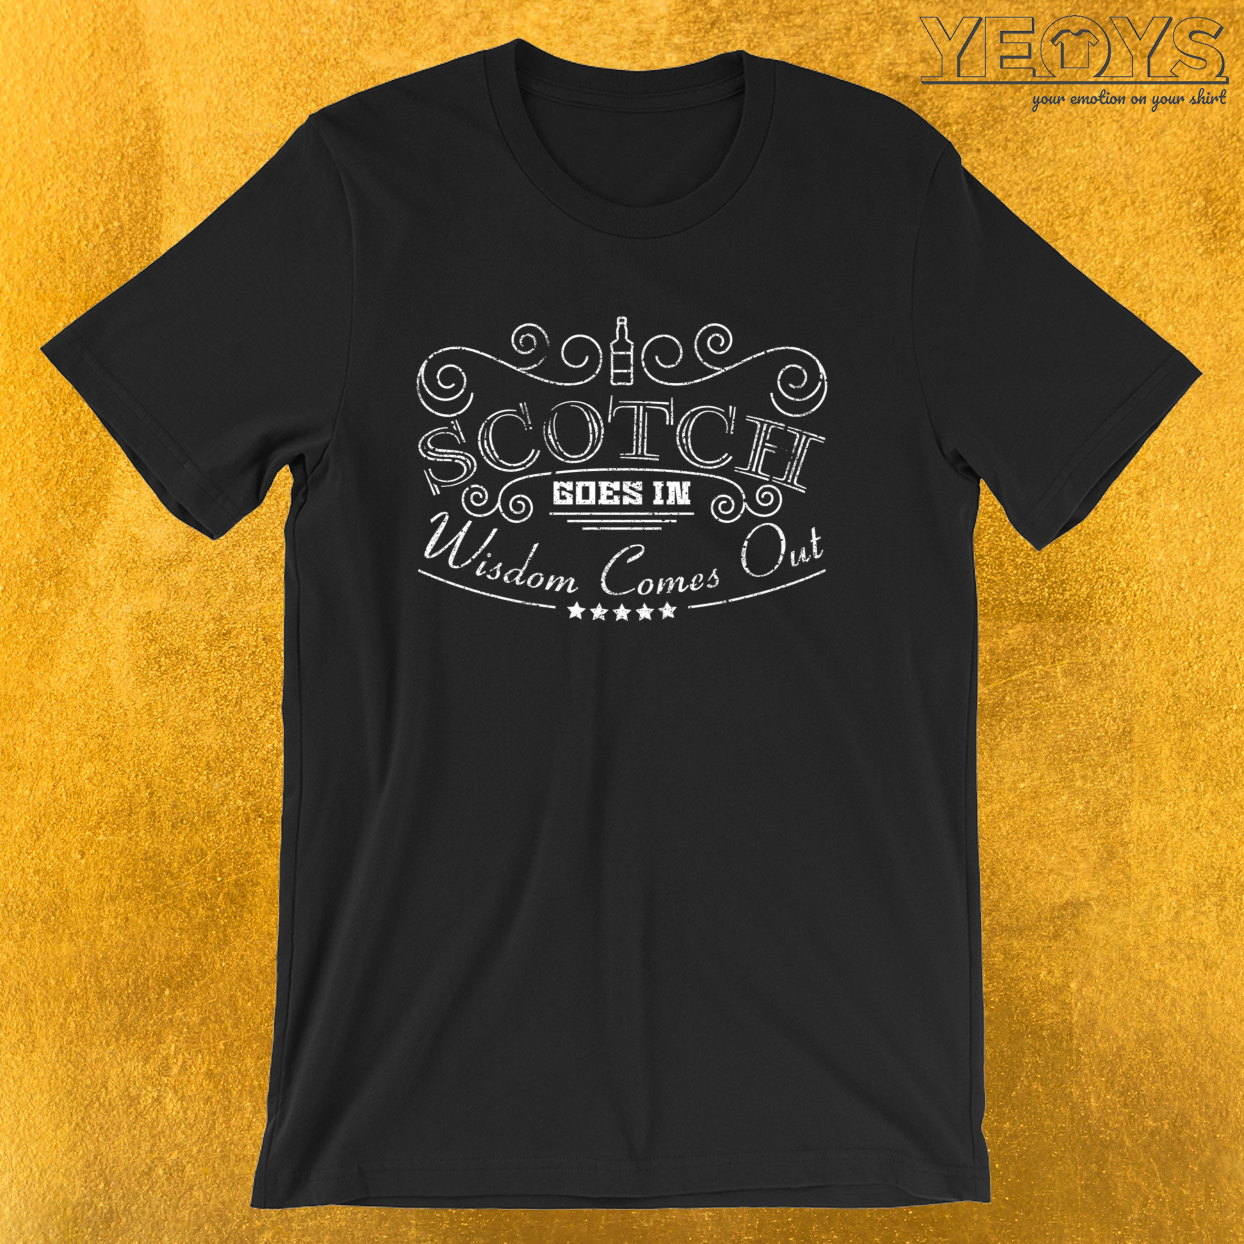 Scotch Goes In Wisdom Comes Out – Scotch Whiskey Tee